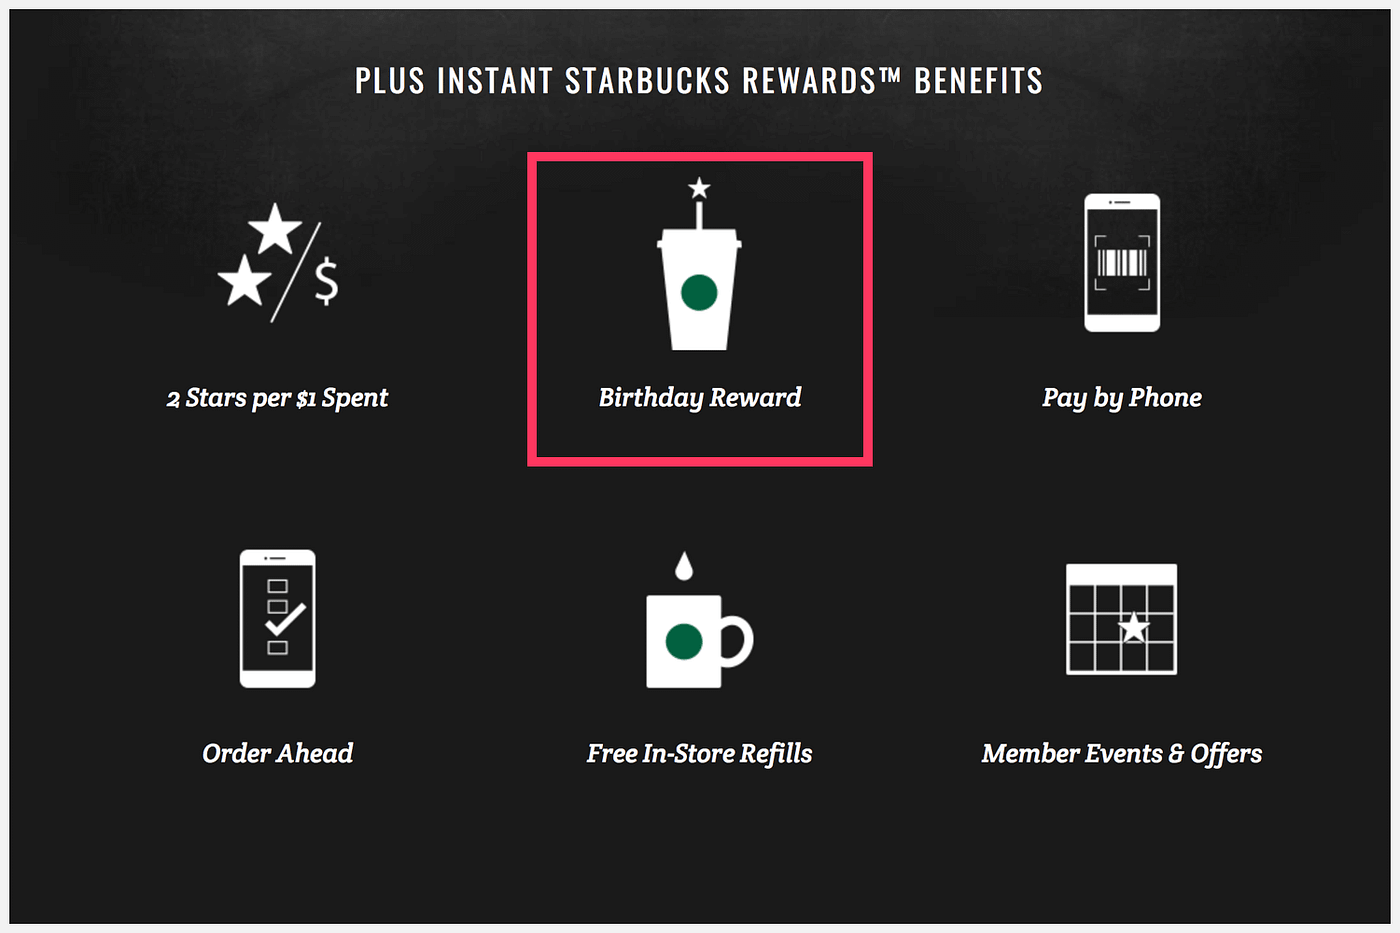 Starbucks Rewards’ webpage with a red square around the free drink on your birthday.